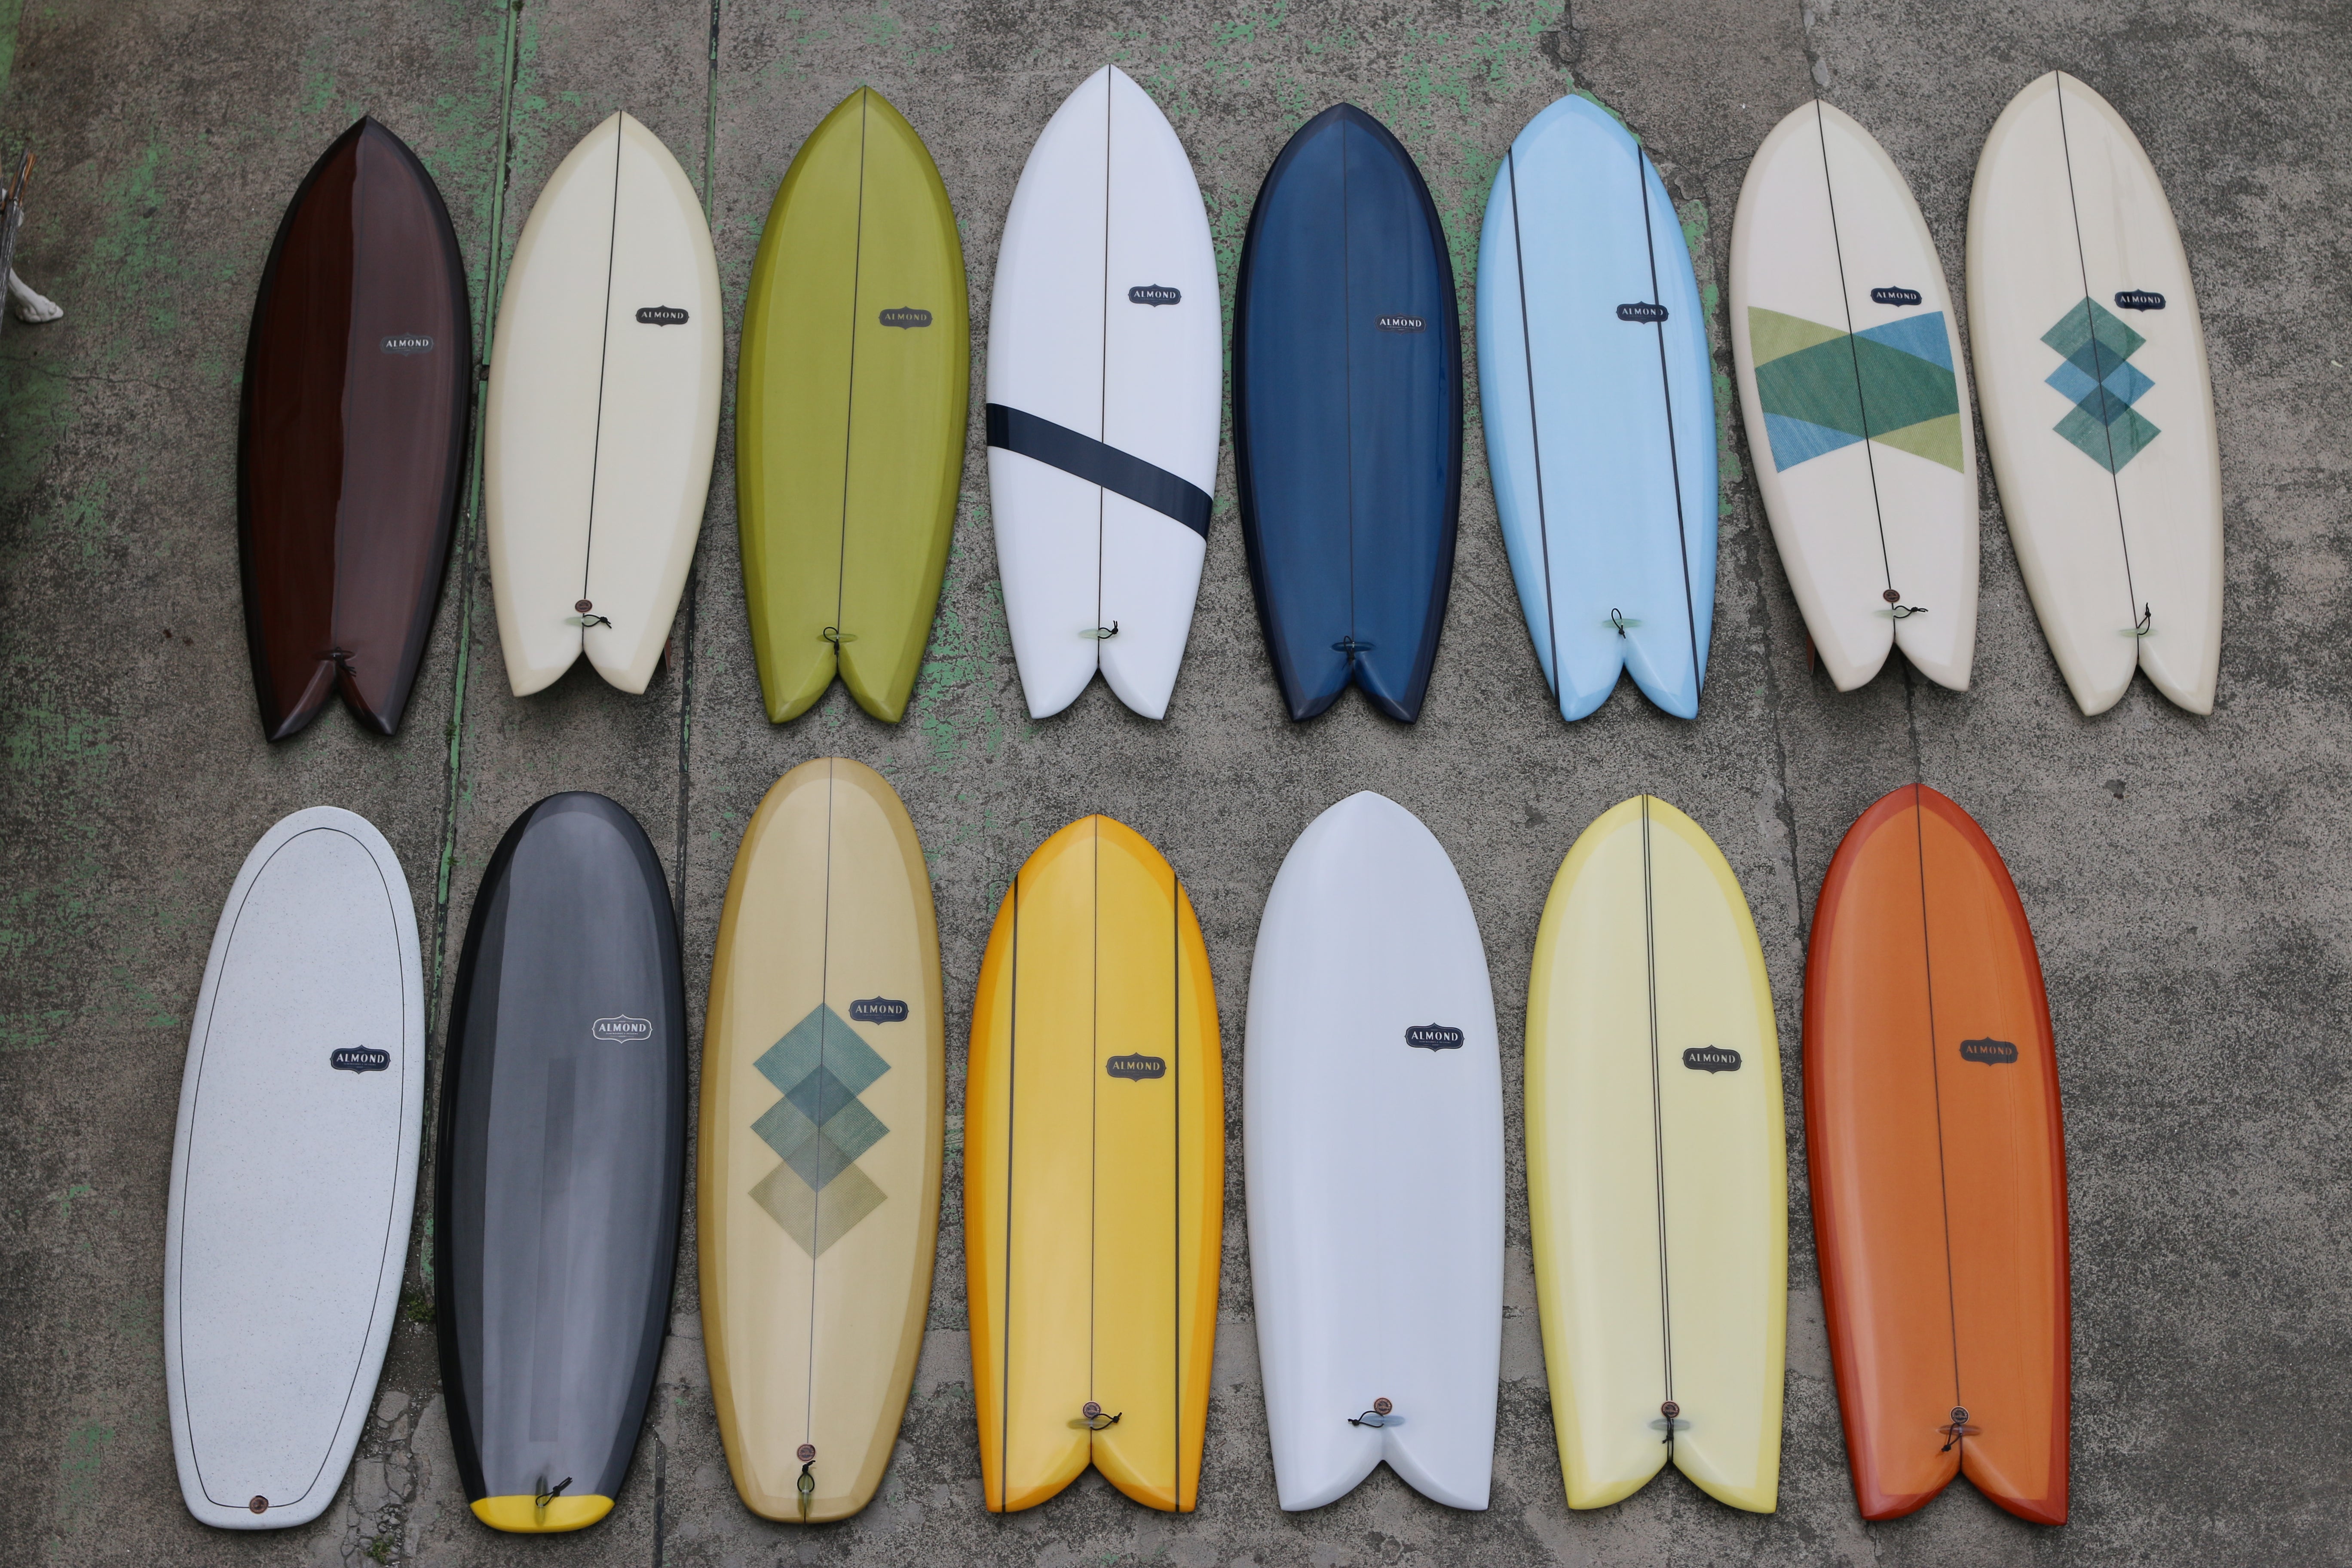 Which Surfboard is on Your List?